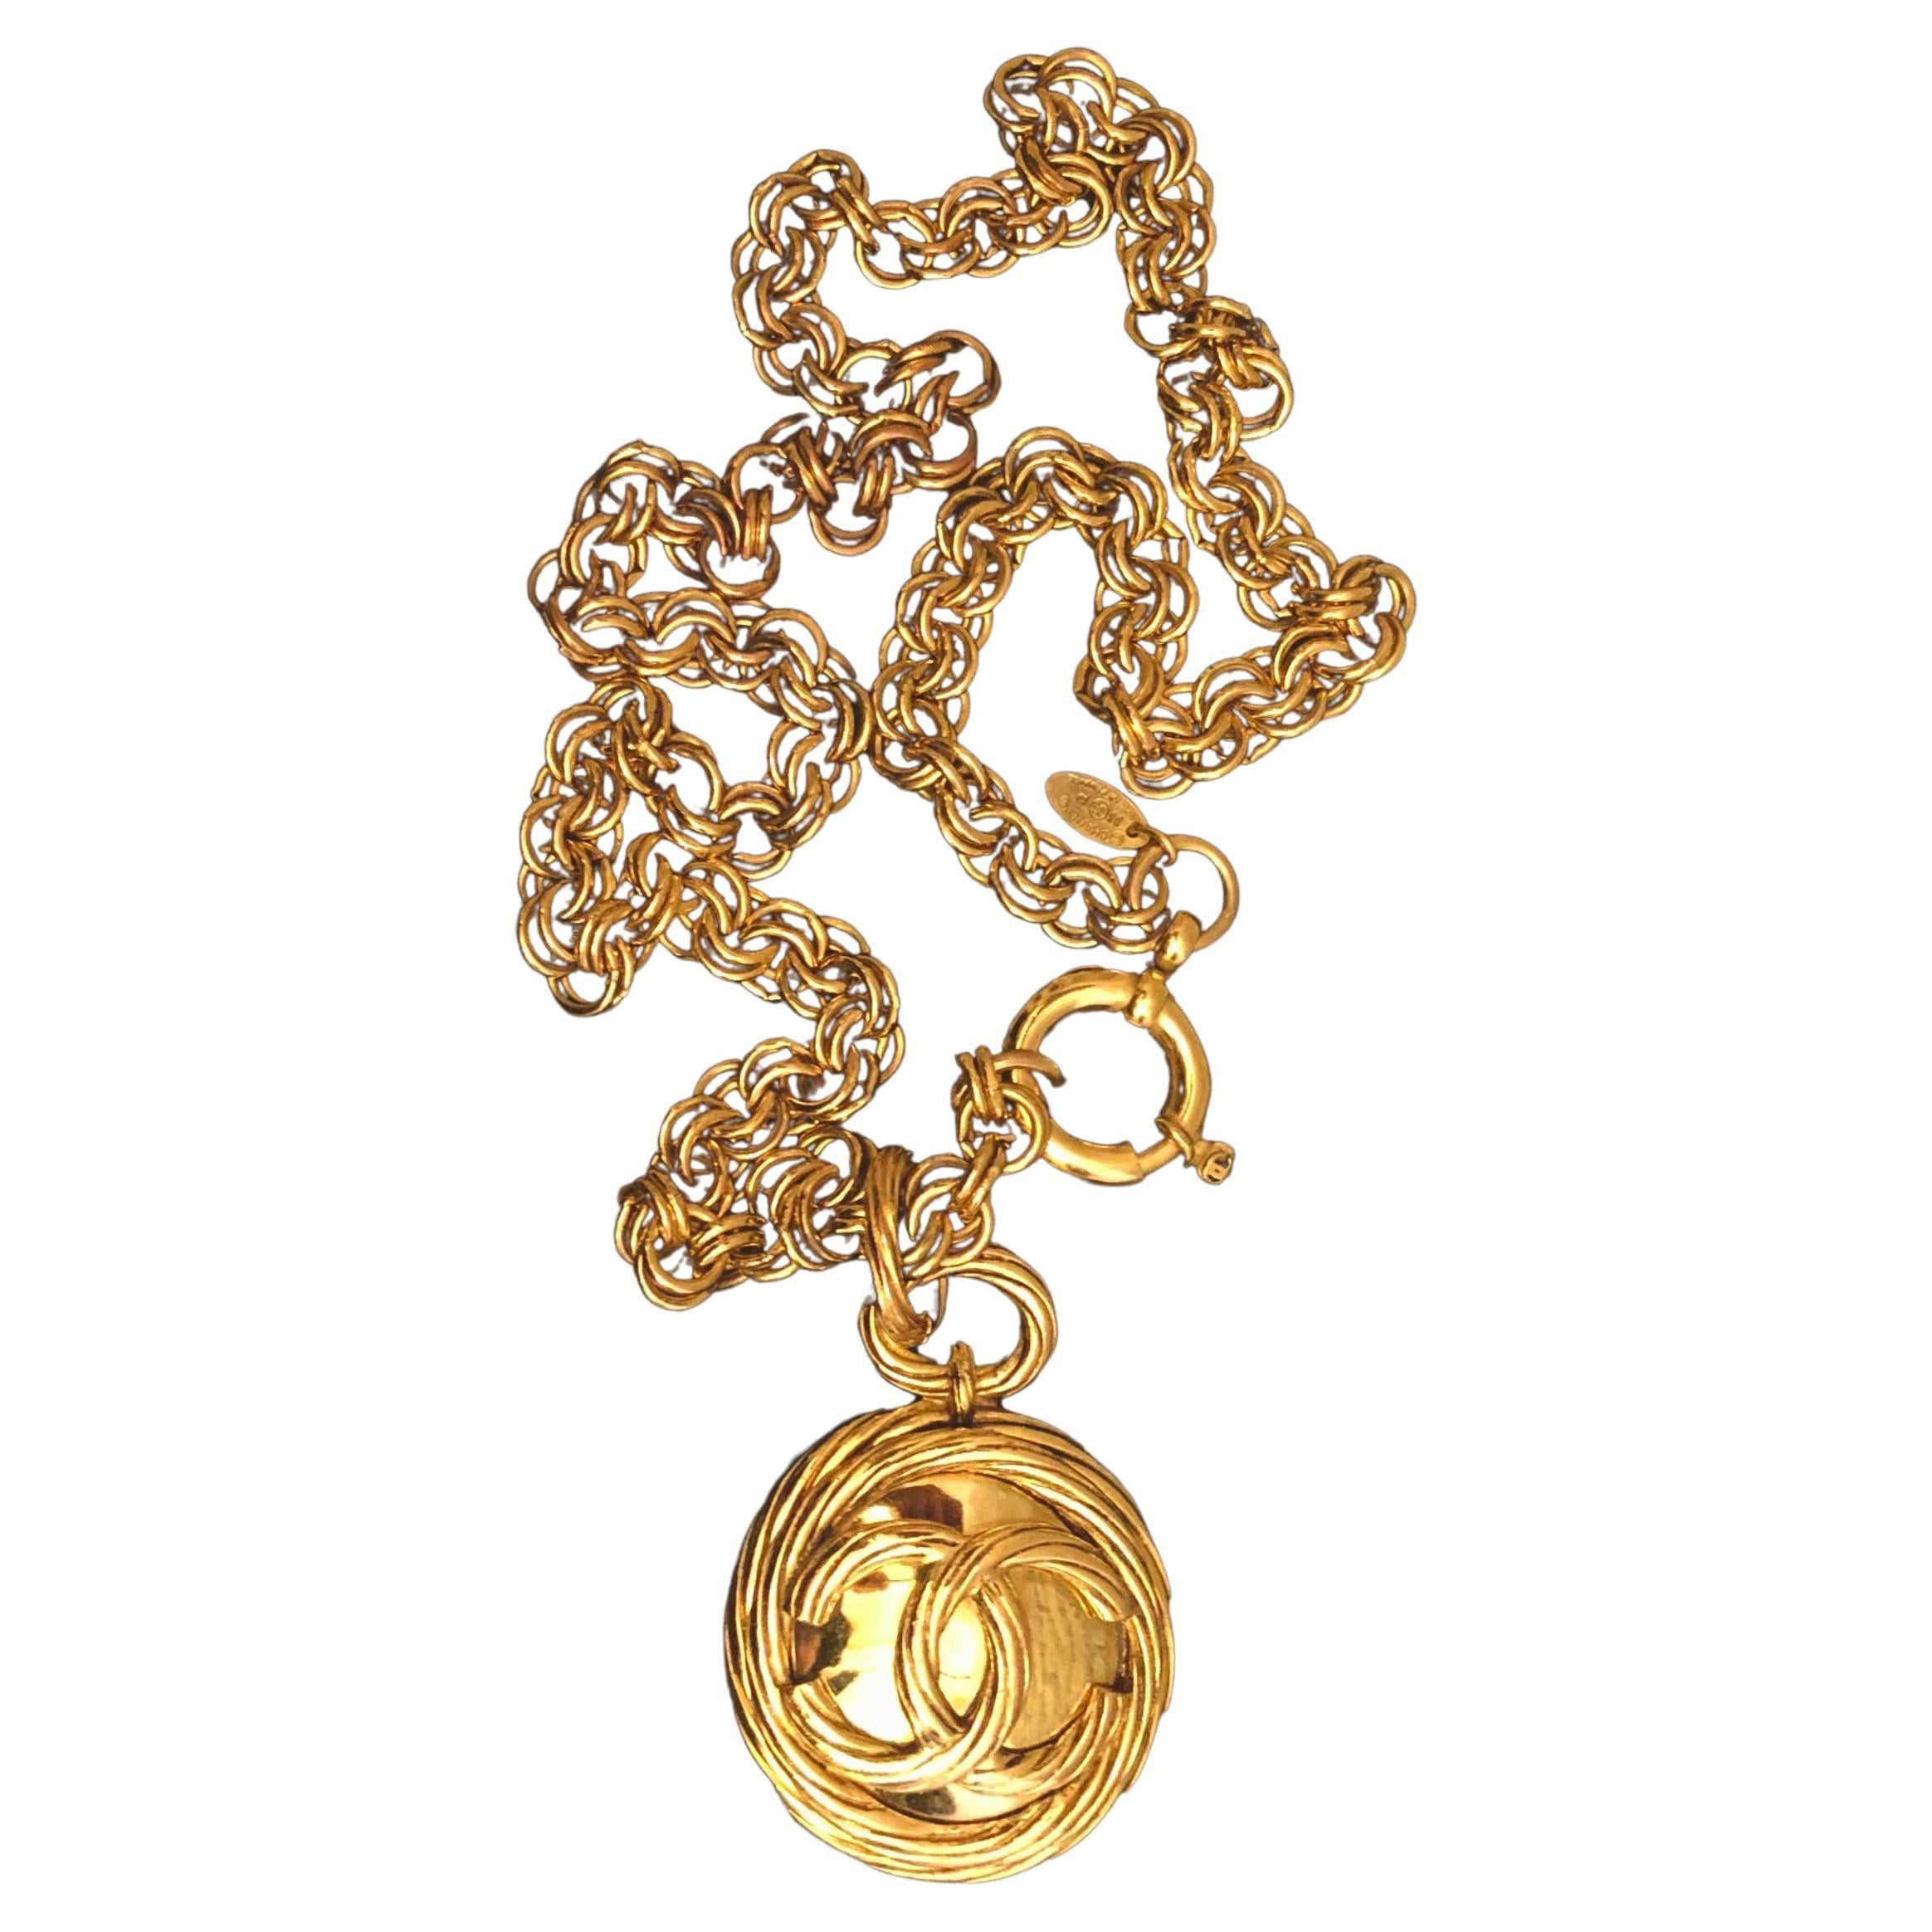 1993 Vintage CHANEL Gold Toned Chain Mirror Necklace For Sale